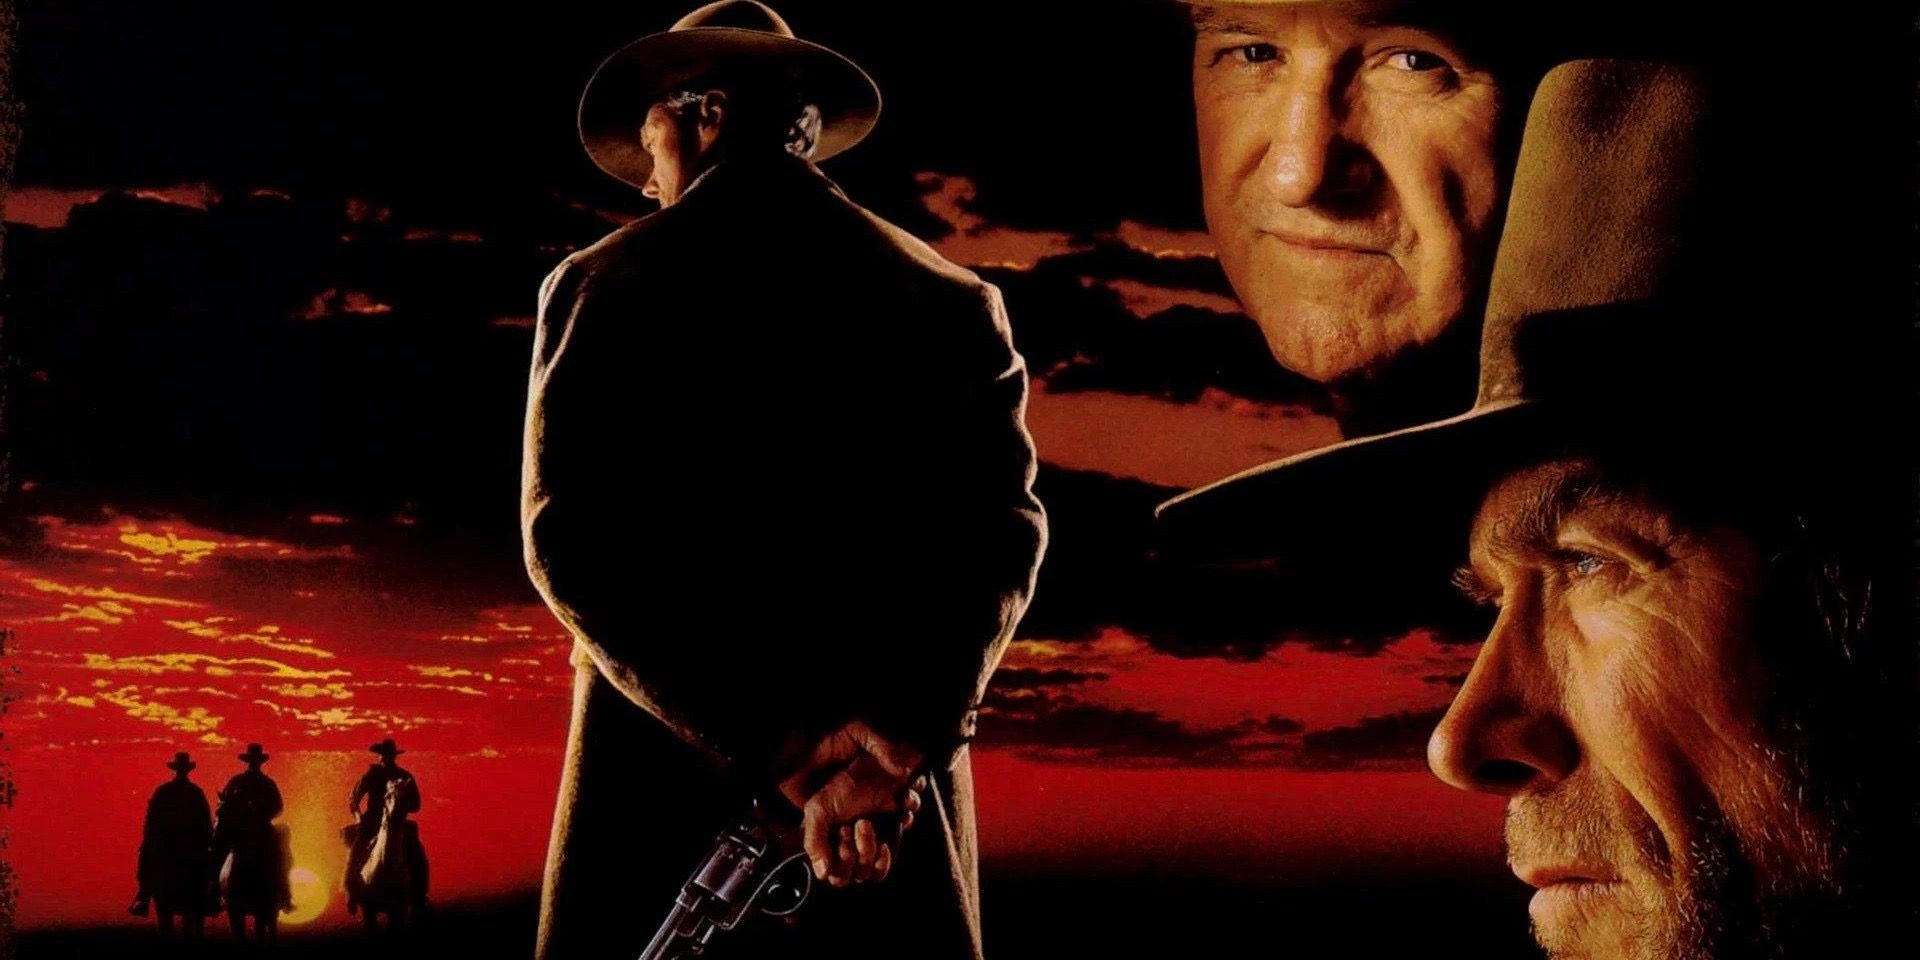 clint eastwood as munny and gene hackman as little bill in unforgiven